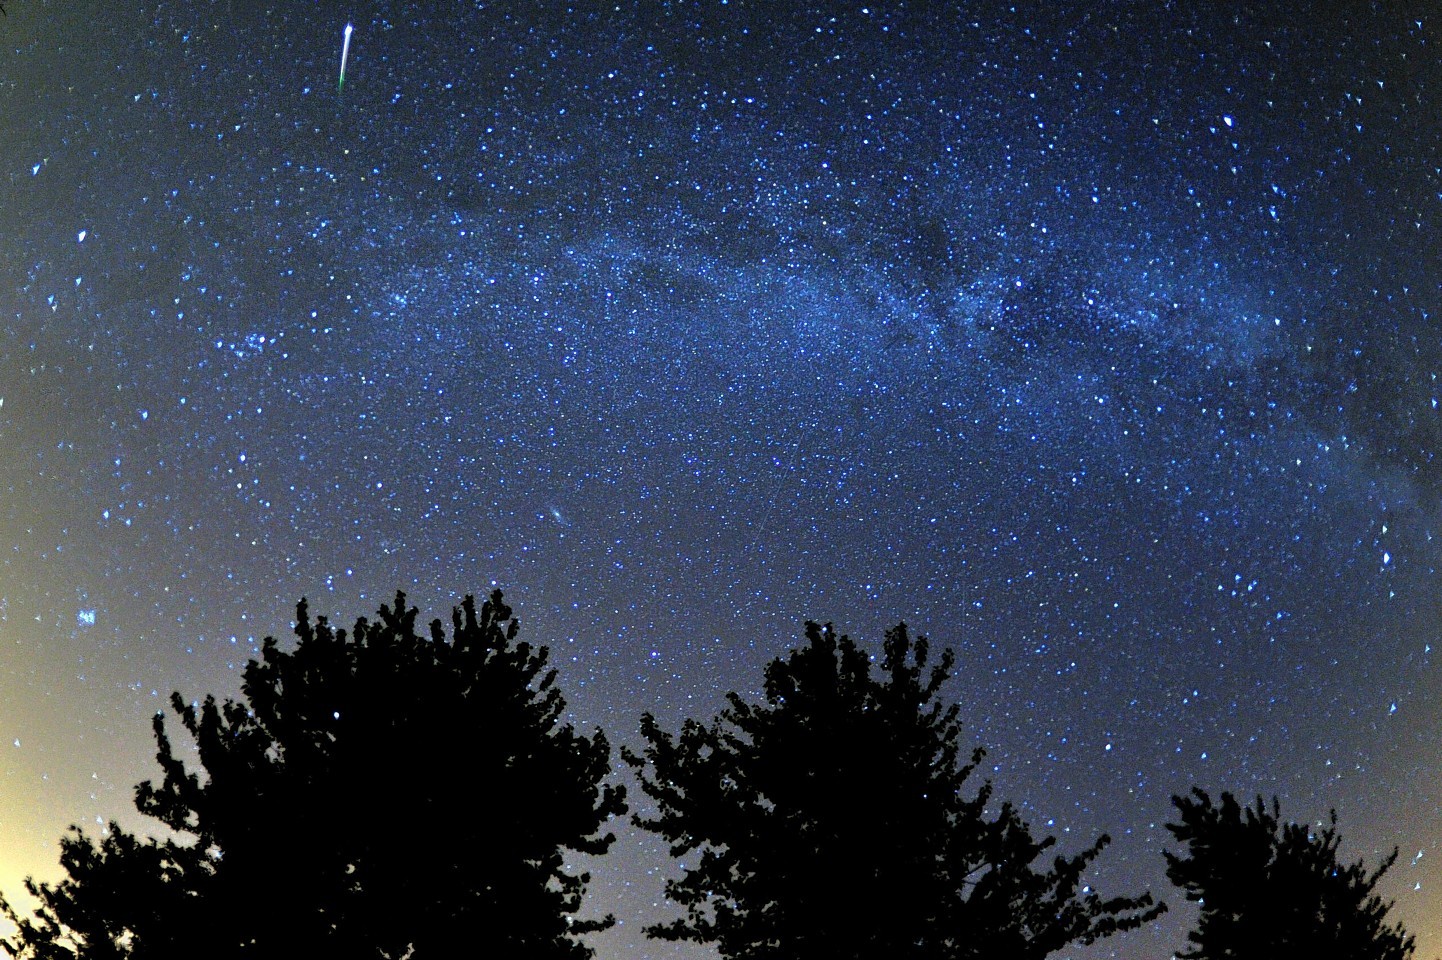 A meteor seen during a Perseids meteor shower over Gloucestershire